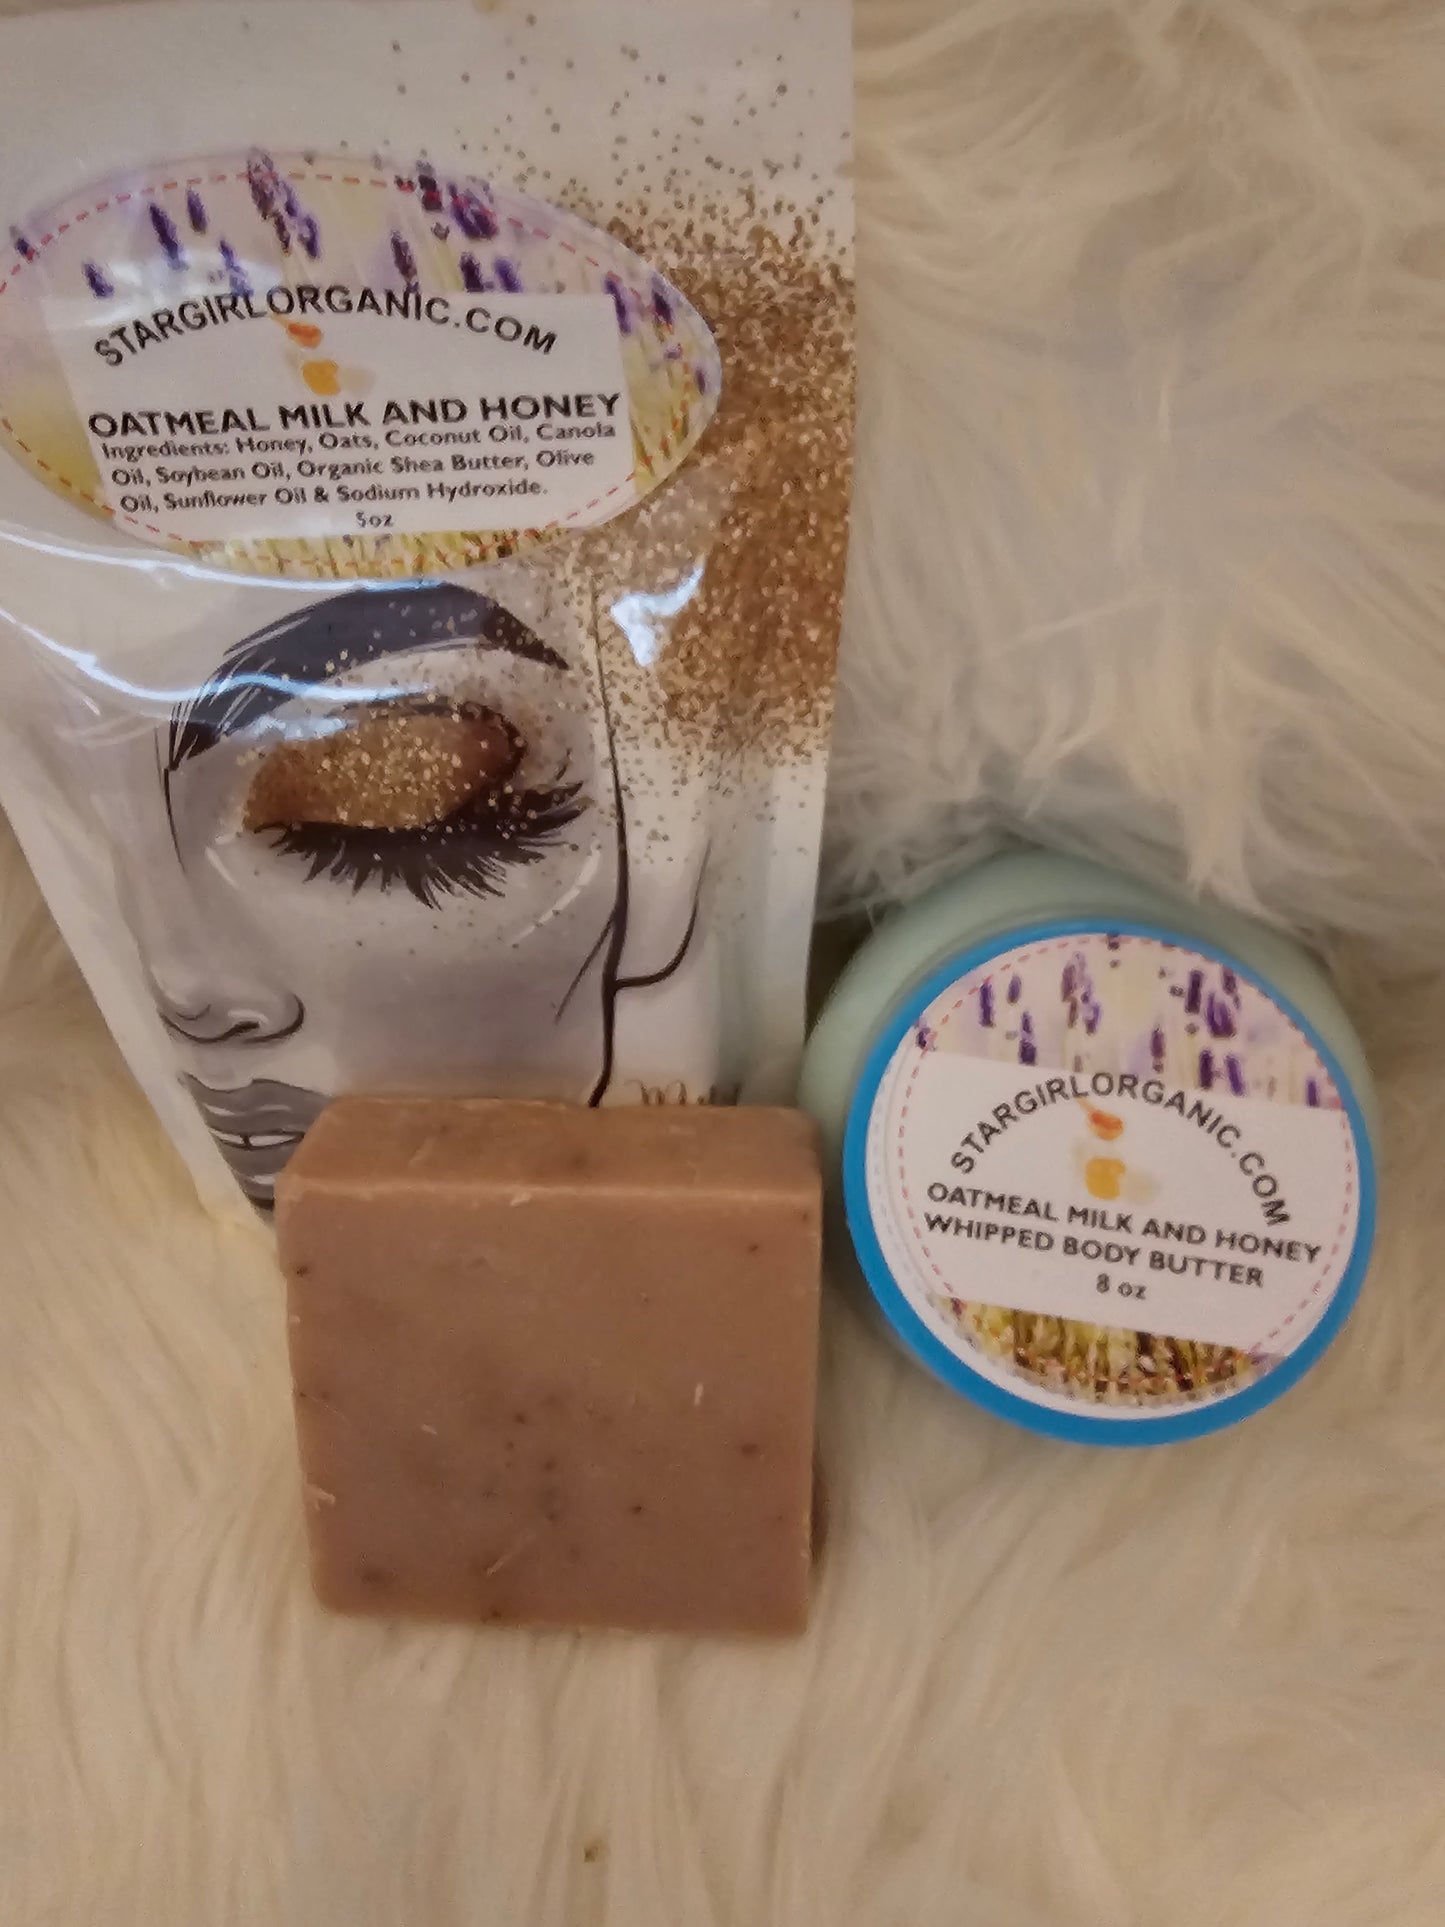 2pc Set Oatmeal Milk And Honey Soap Bar and Oatmeal Milk and Honey Whipped Body Butter